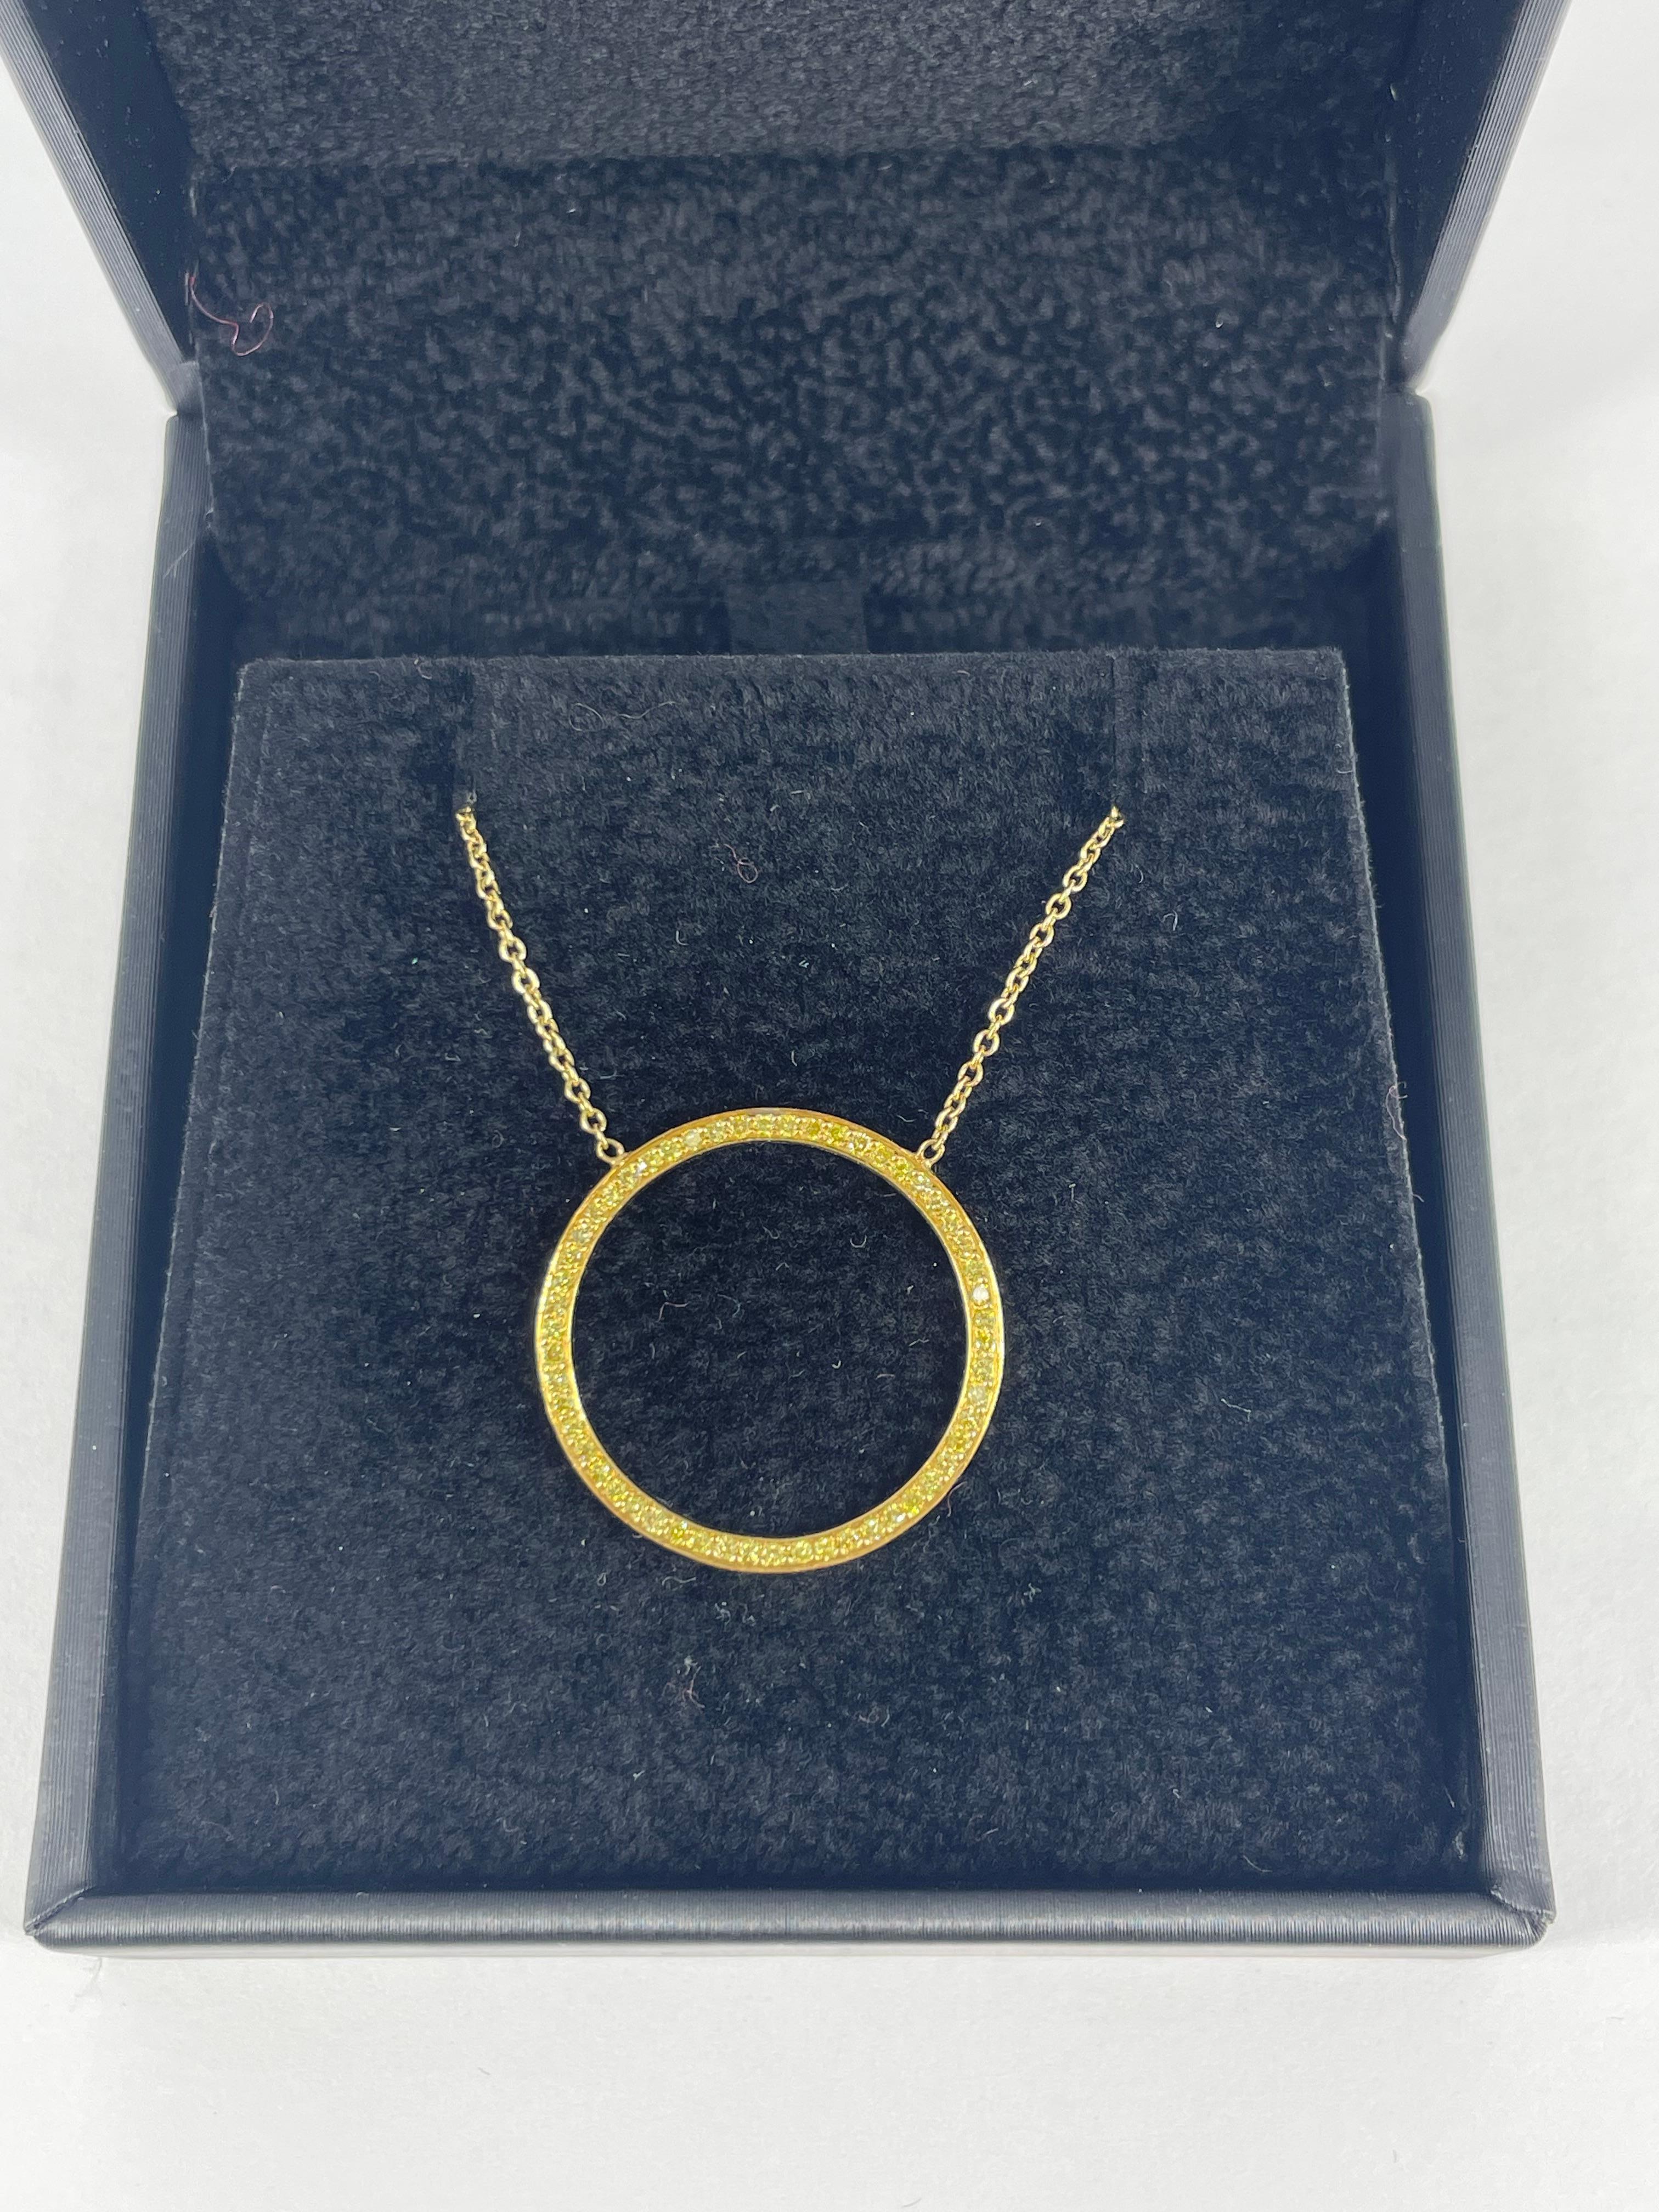 This sophisticated piece by J. Birnbach is a sleek open circle with 0.43 carats fancy intense yellow diamonds. The pendant is attached to the chain so it will always lay flat and straight on the wearer. The pendant and chain are crafted in 18K